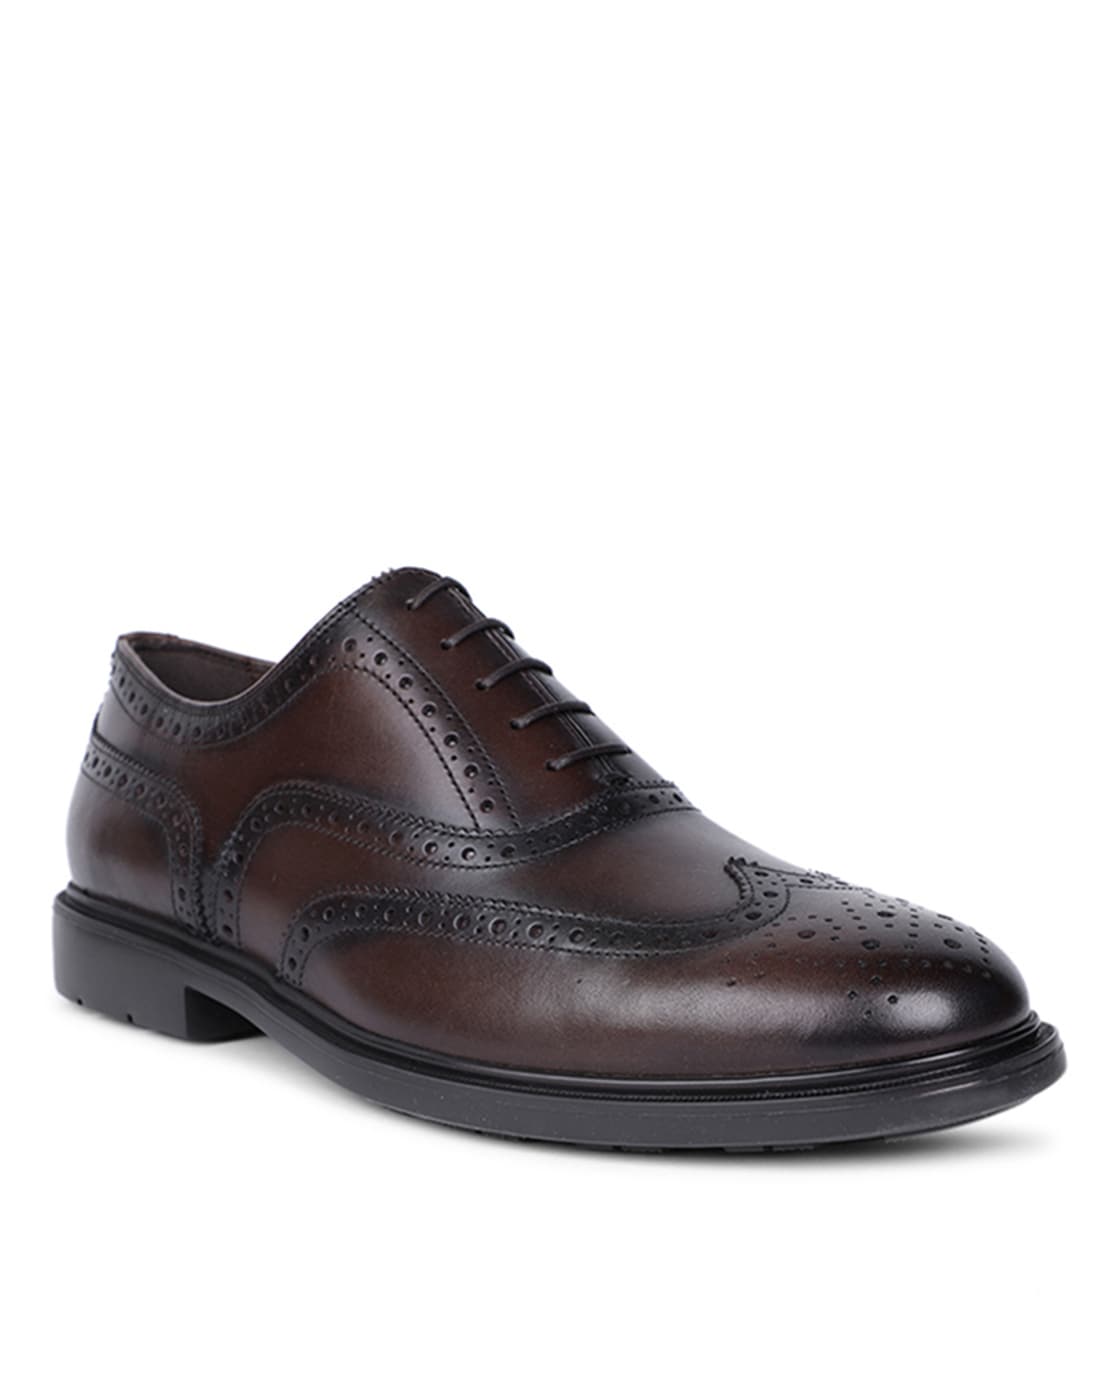 Buy Brown Formal Shoes for by Hush Puppies Online | Ajio.com